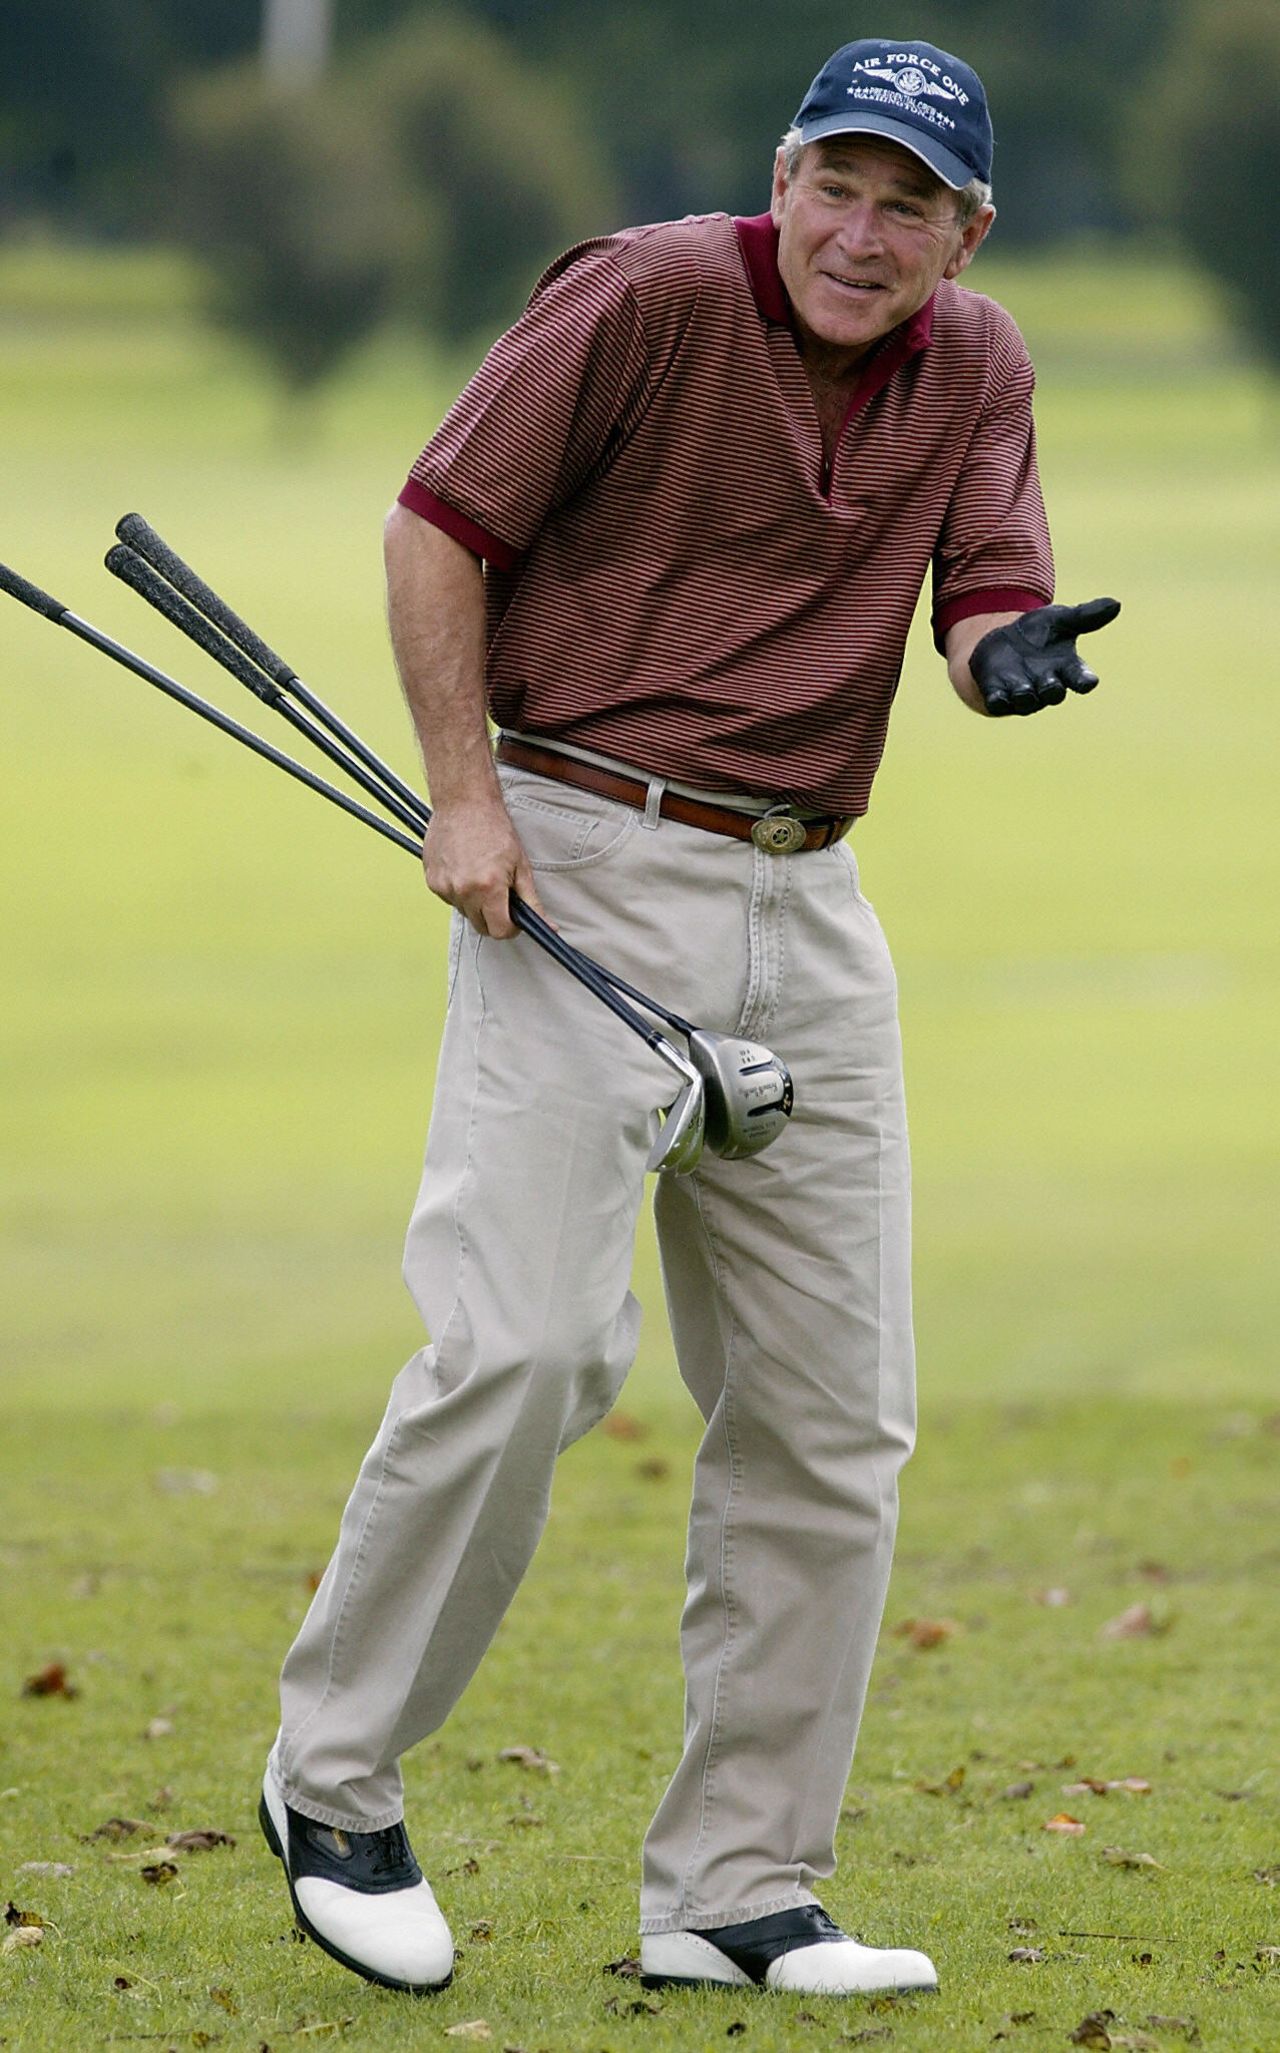 George W. Bush was a common face on the golf course, usually with media in tow.